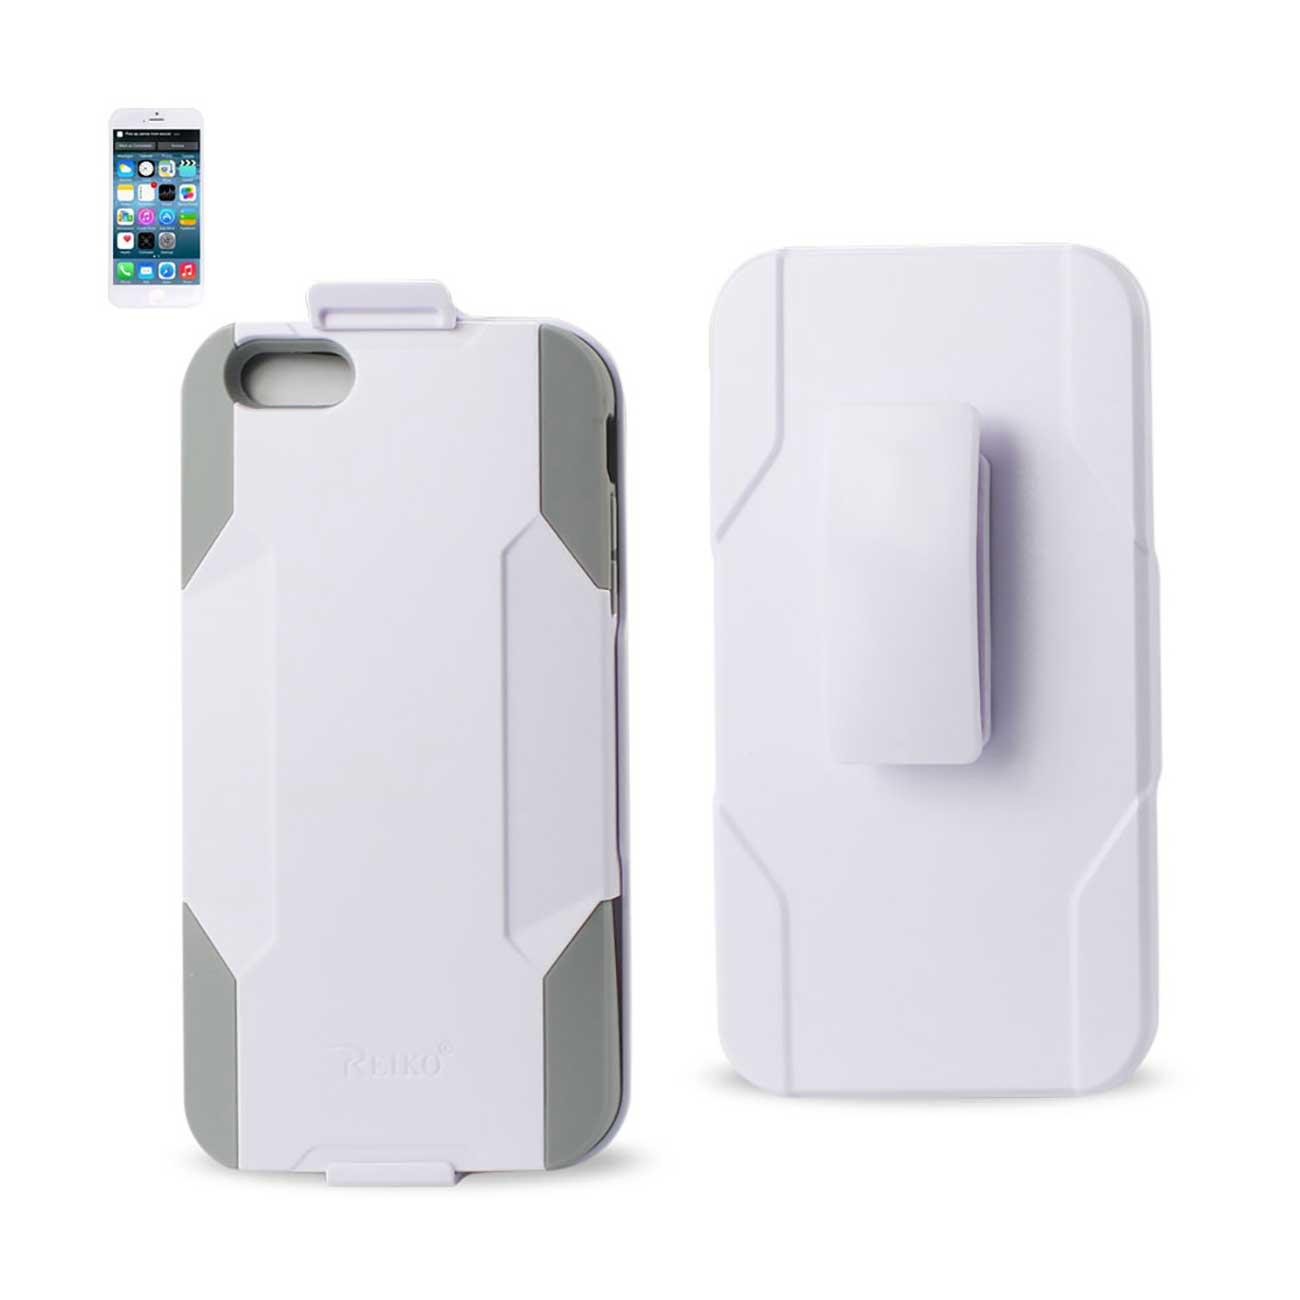 Reiko iPhone 6 Plus 3-In-1 Hybrid Heavy Duty Holster Combo Case In Gray White